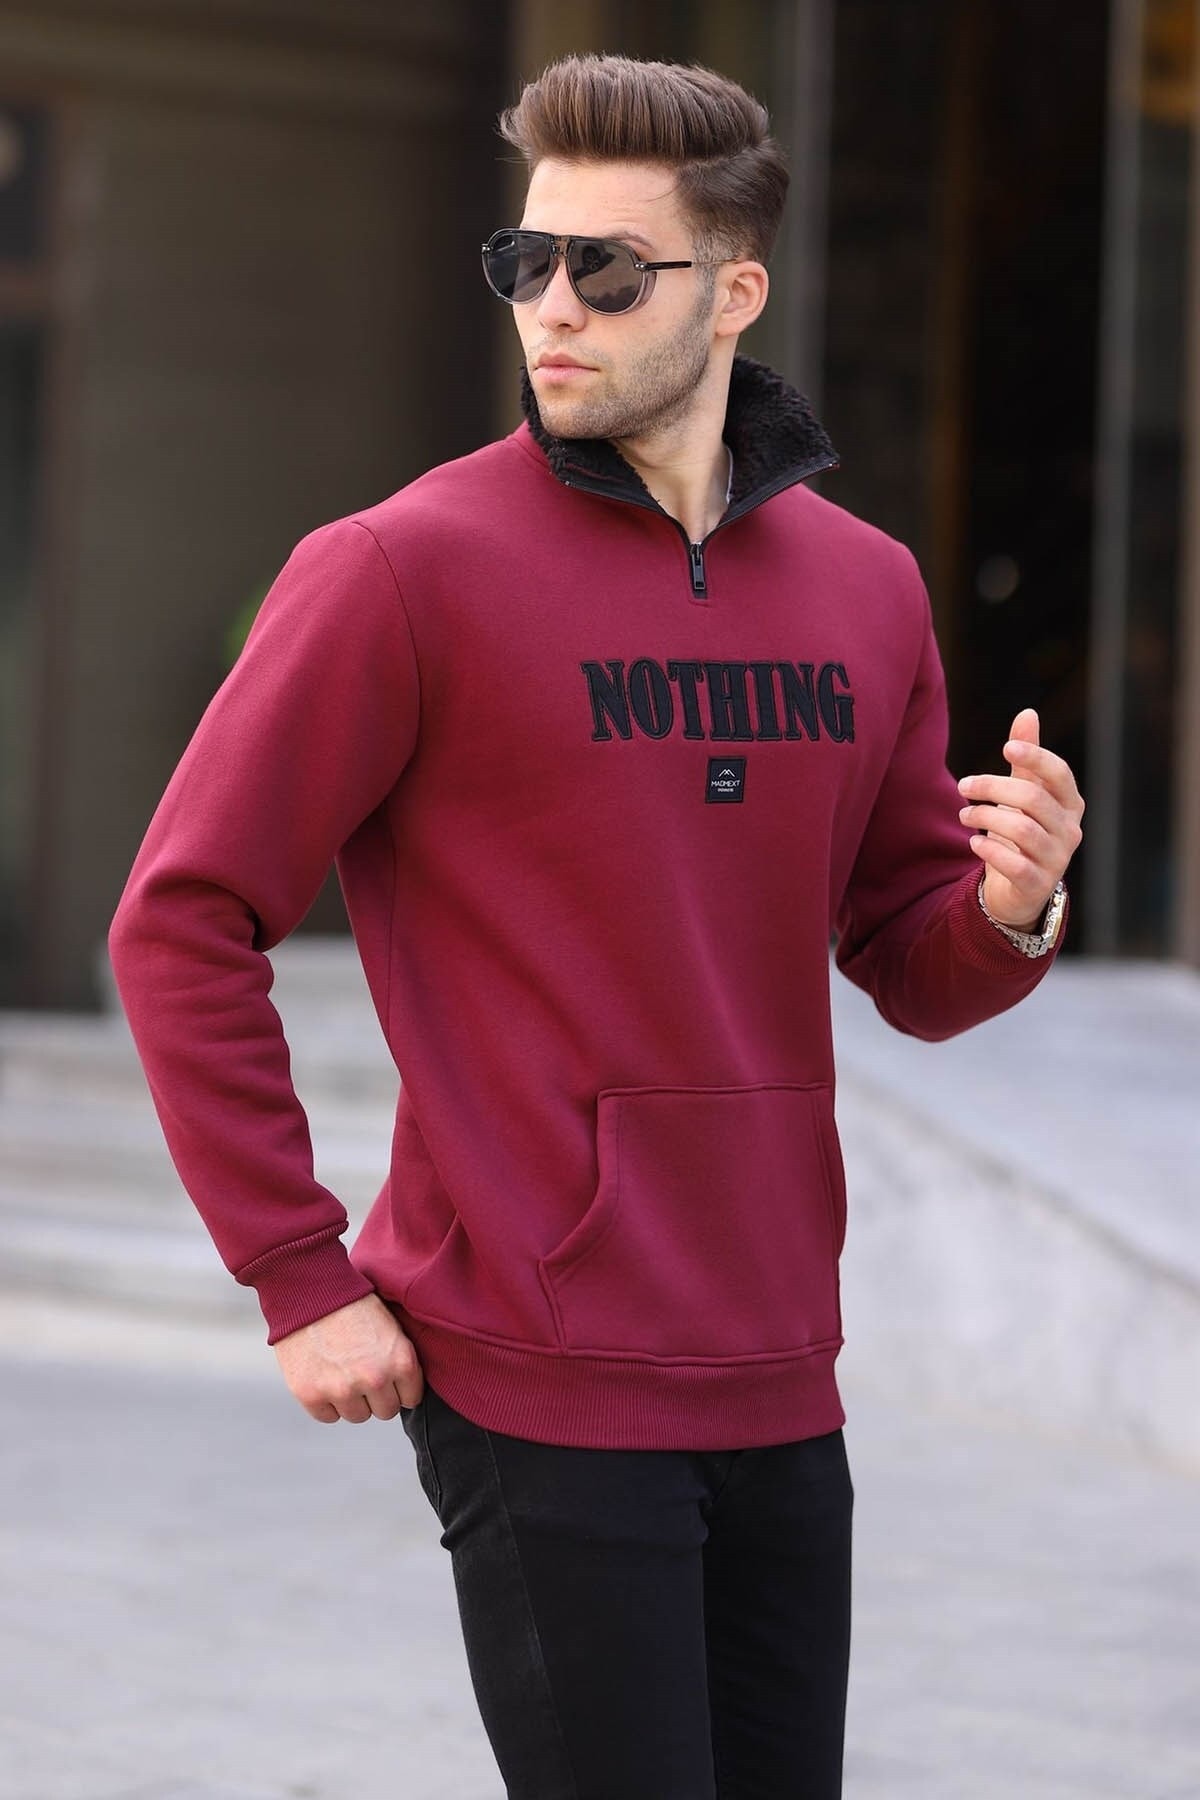 Madmext Claret Red Printed Sweatshirt with Zipper Detail 6003